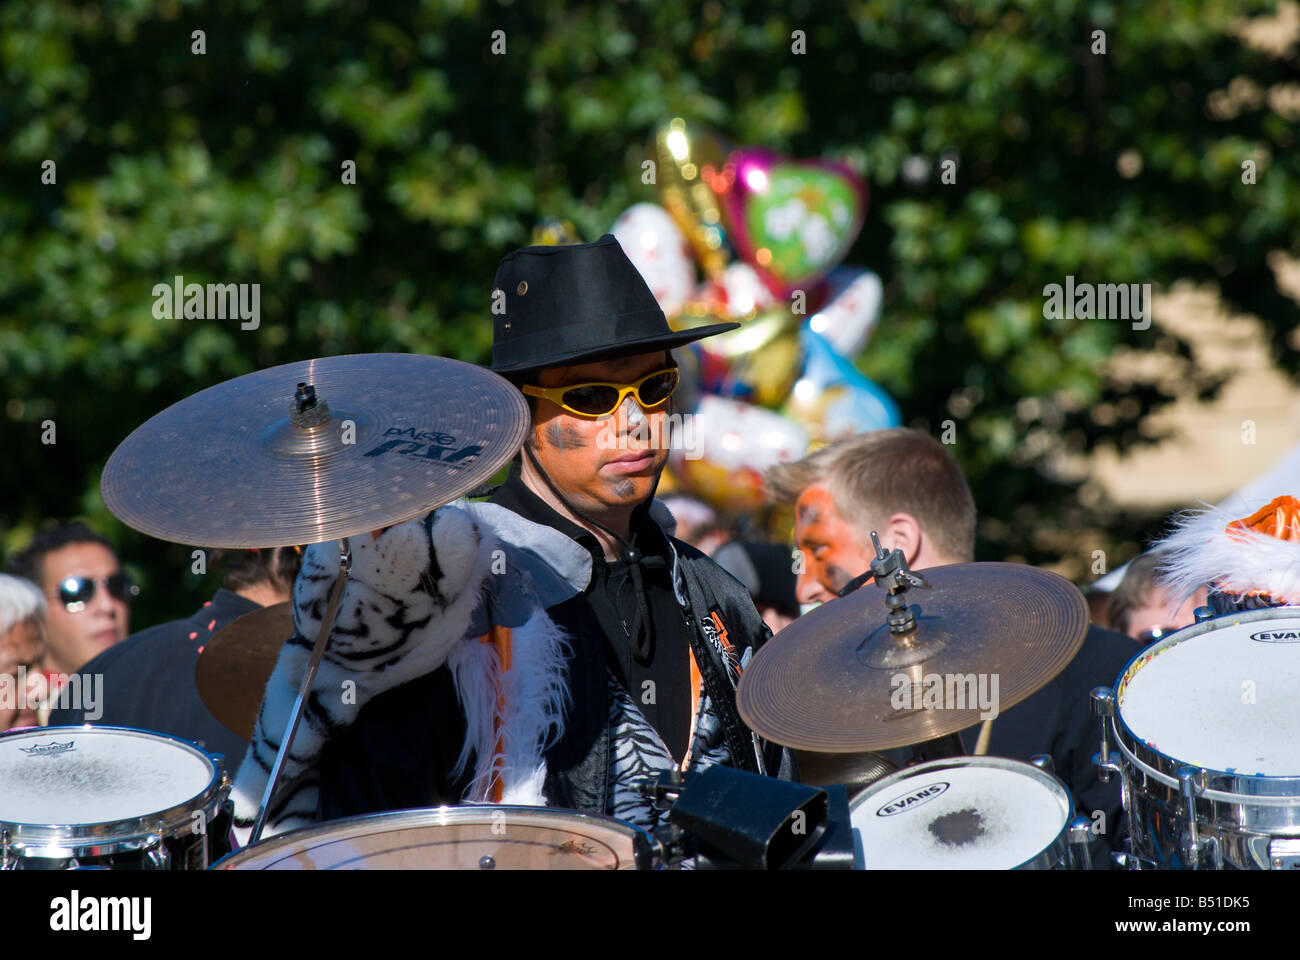 Drummer form the Rosswoschwyber Guggenmusik band at the Fete des Vendanges Stock Photo